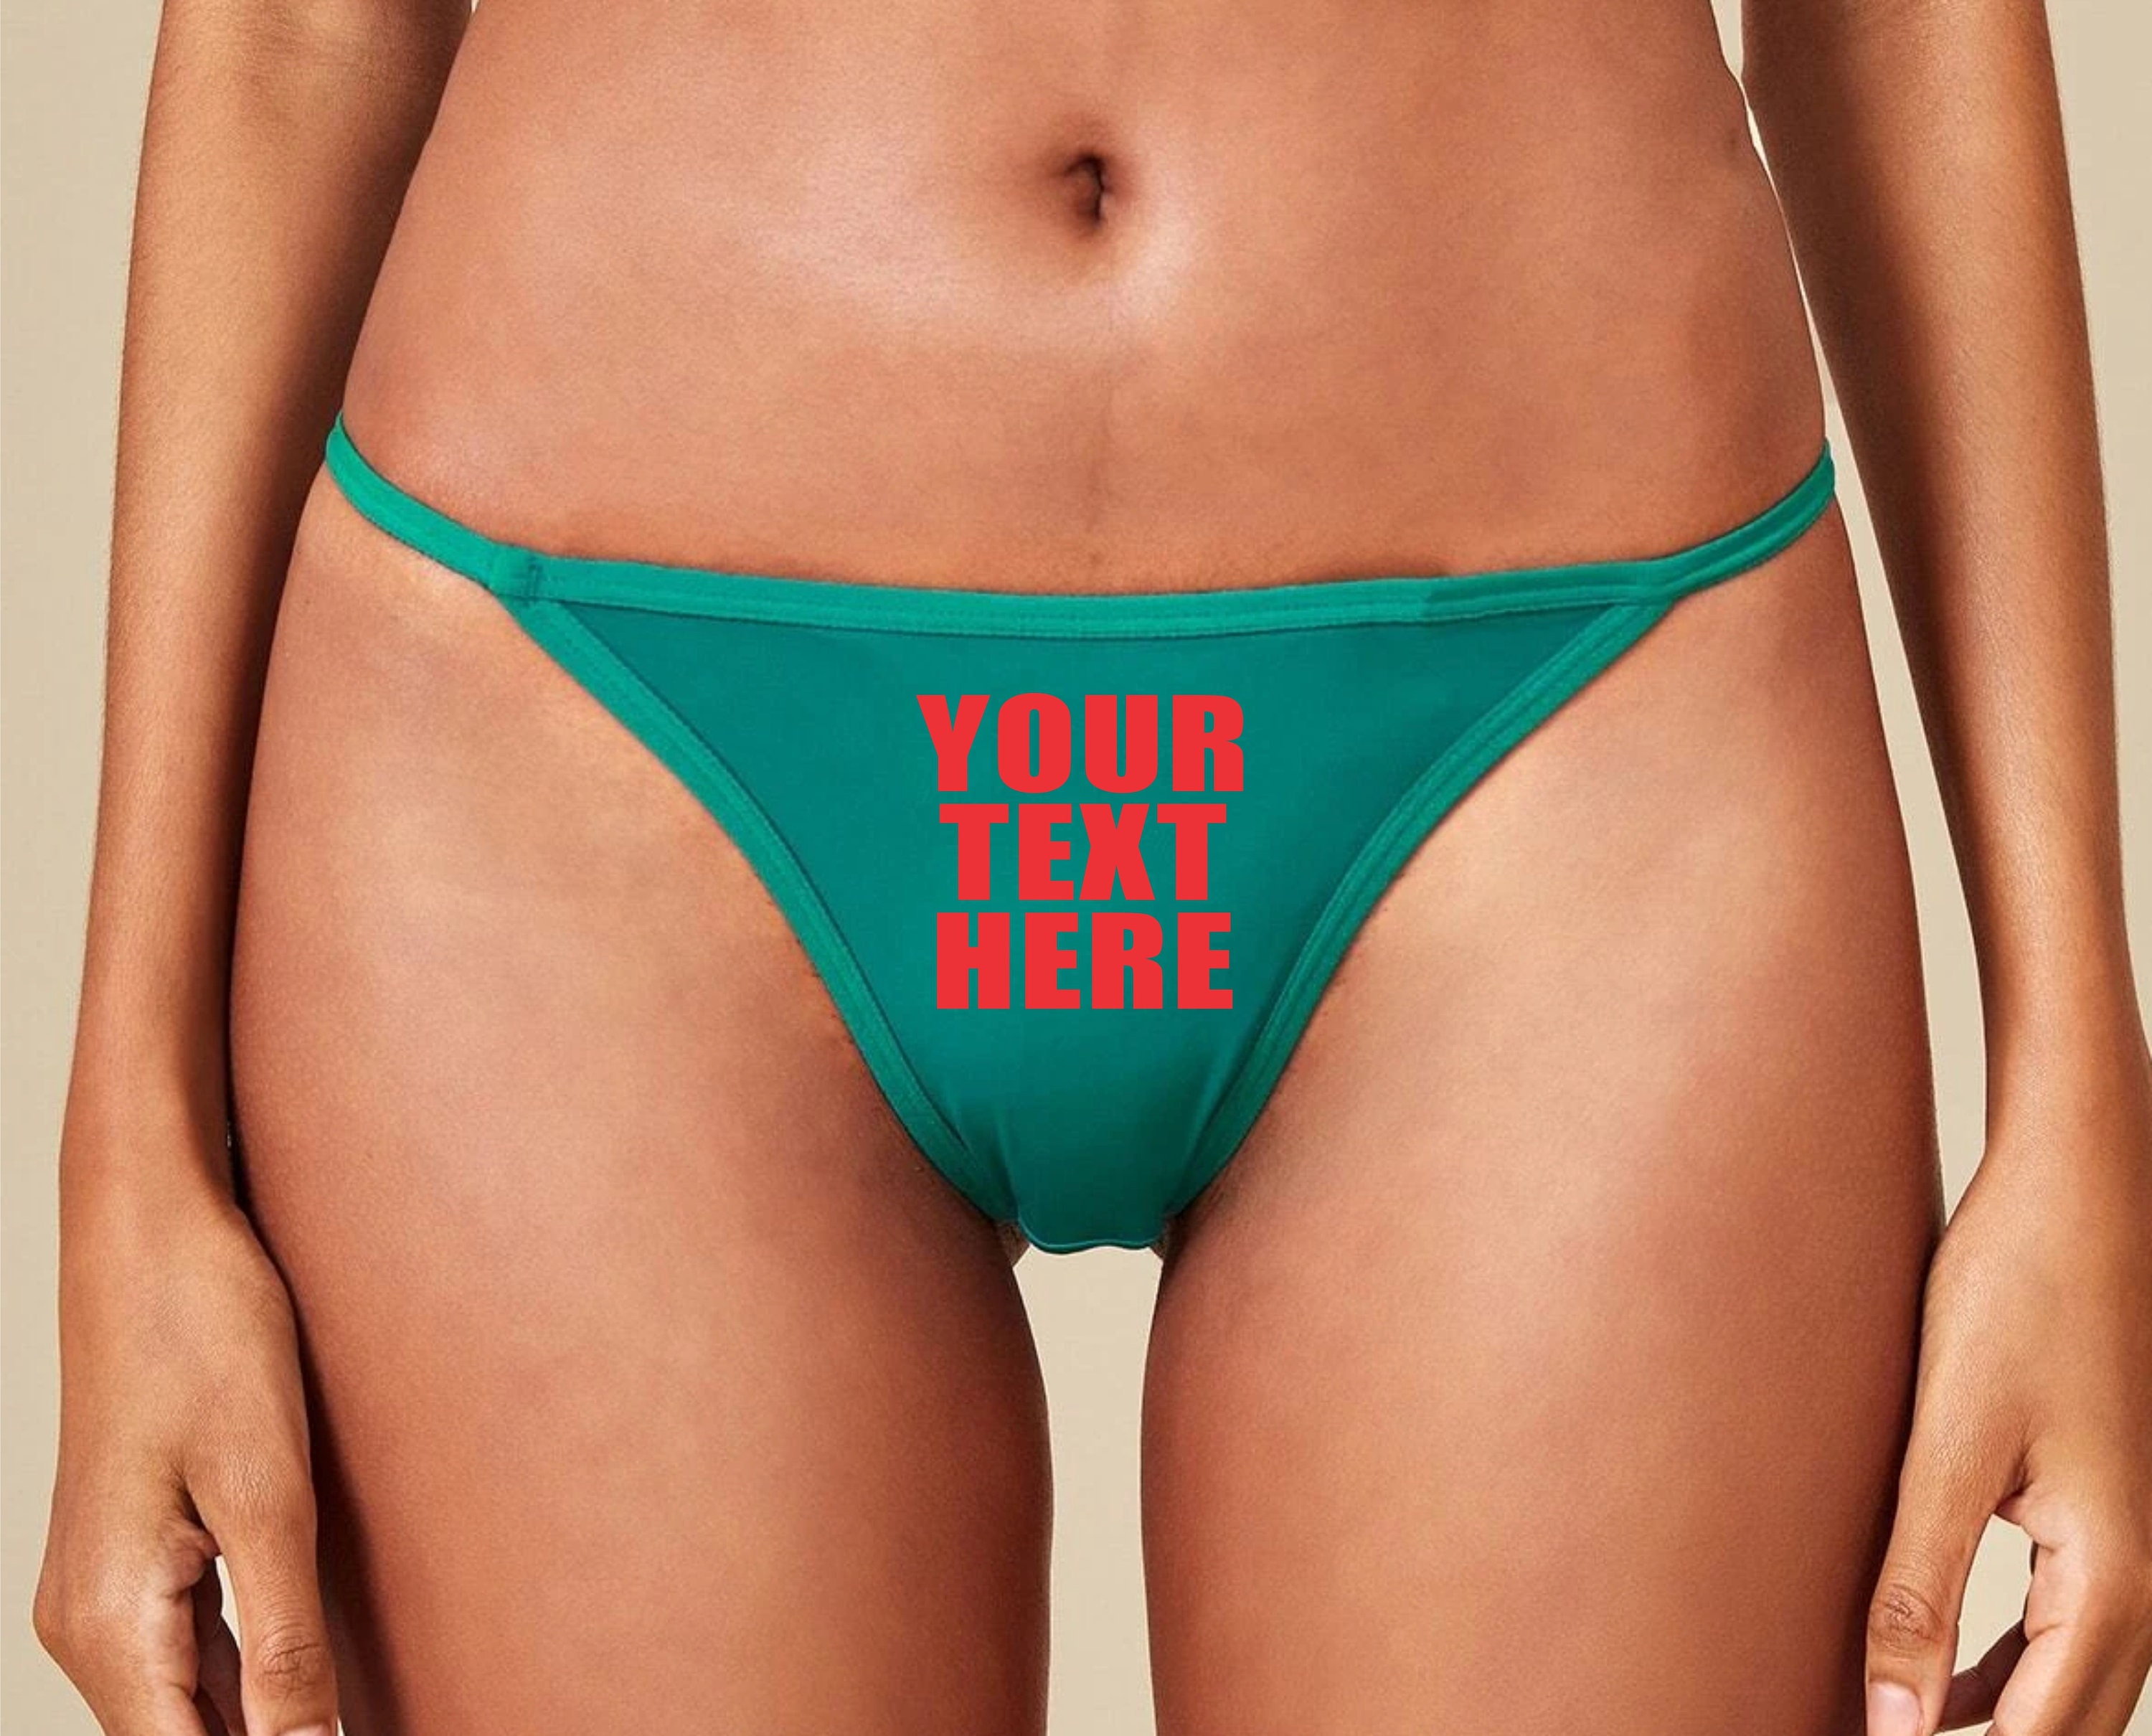 YOUR TEXT HERE Teal Navy Black G-string Thong Panties Underwear